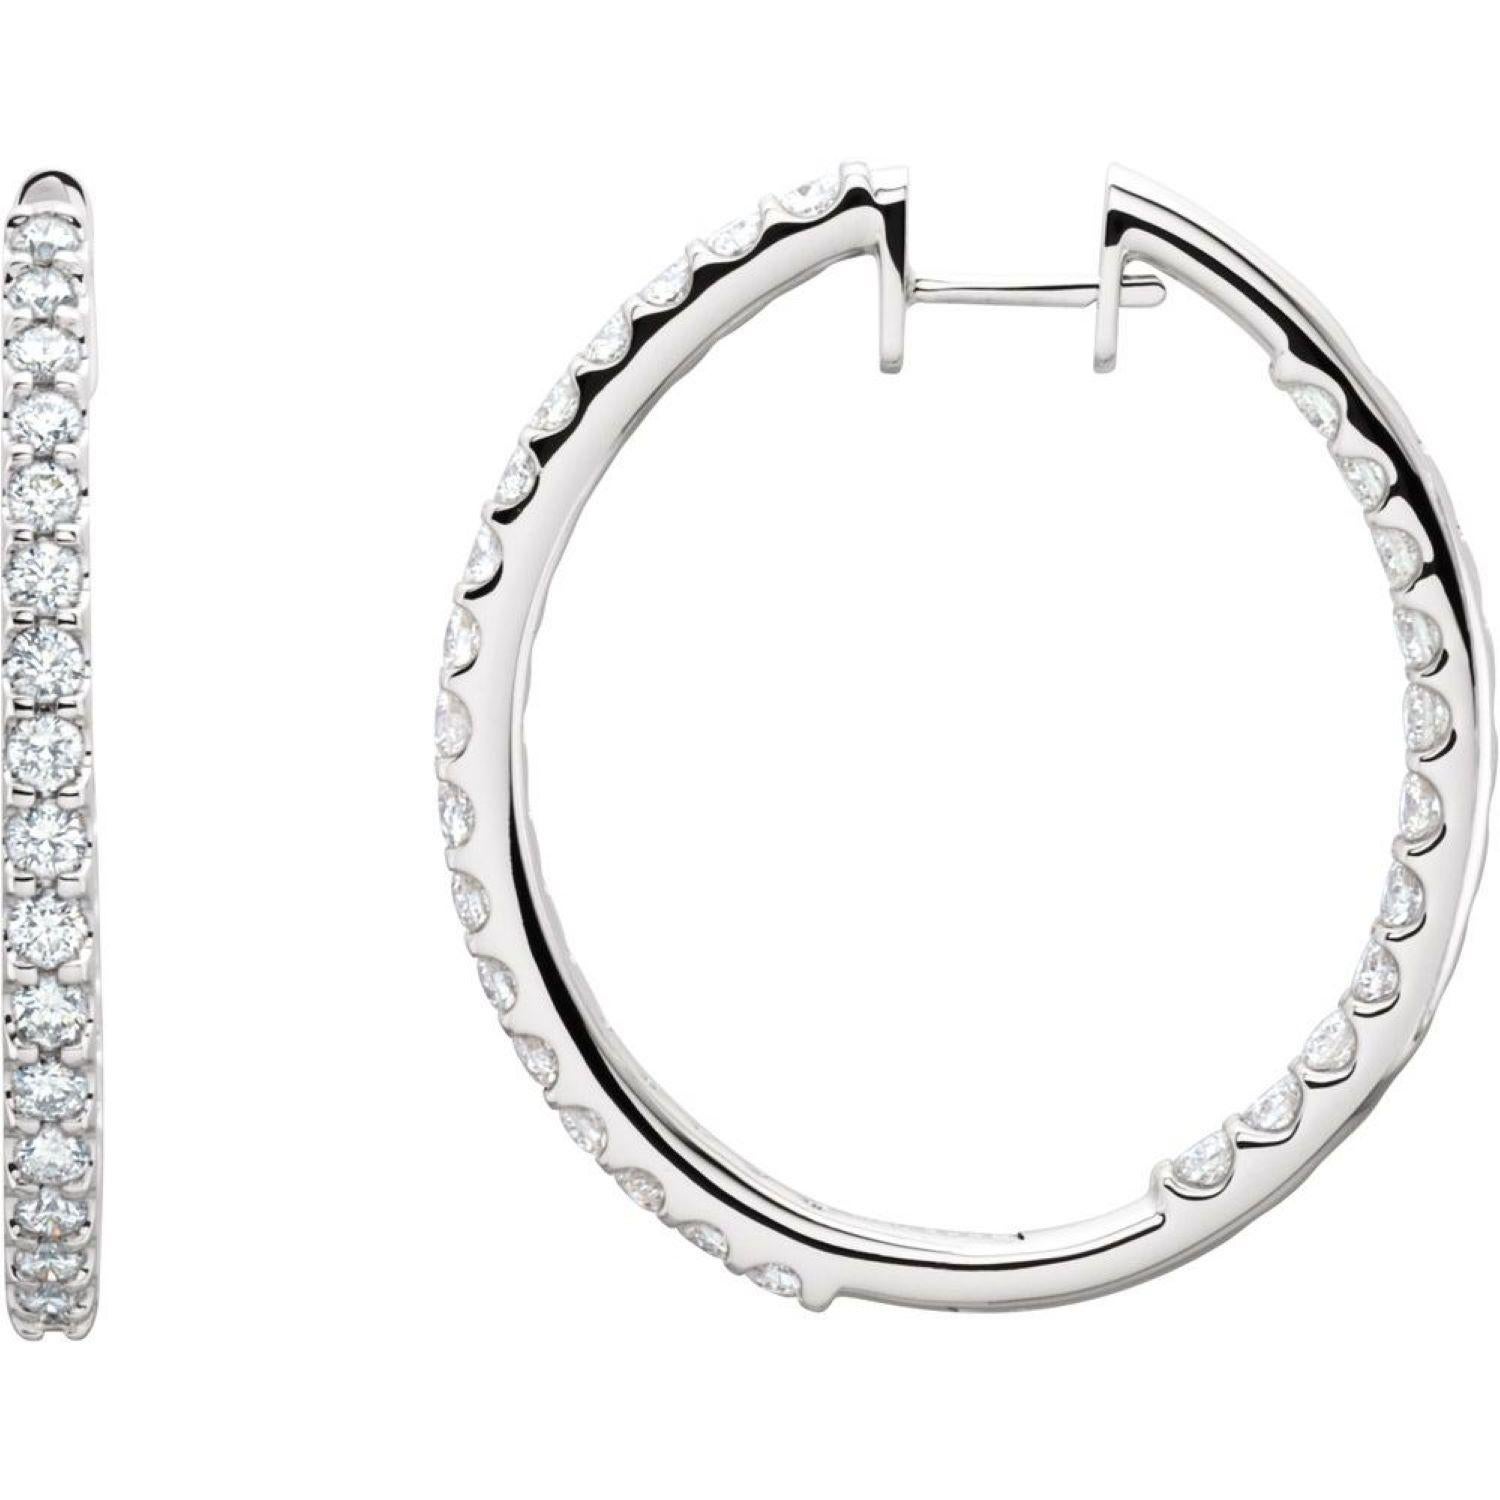 Weight:	7.06 DWT (10.98 grams)
Earring Type:	Hoop
Earring Post Type:	Ear Wire
Earring Back Type Included:	Hinged
Earring Dimensions:	35.3x35.3 mm
Thickness:	2.6 mm
Primary Stone Type:	Natural Diamond
Primary Stone Shape:	Round
Diamond